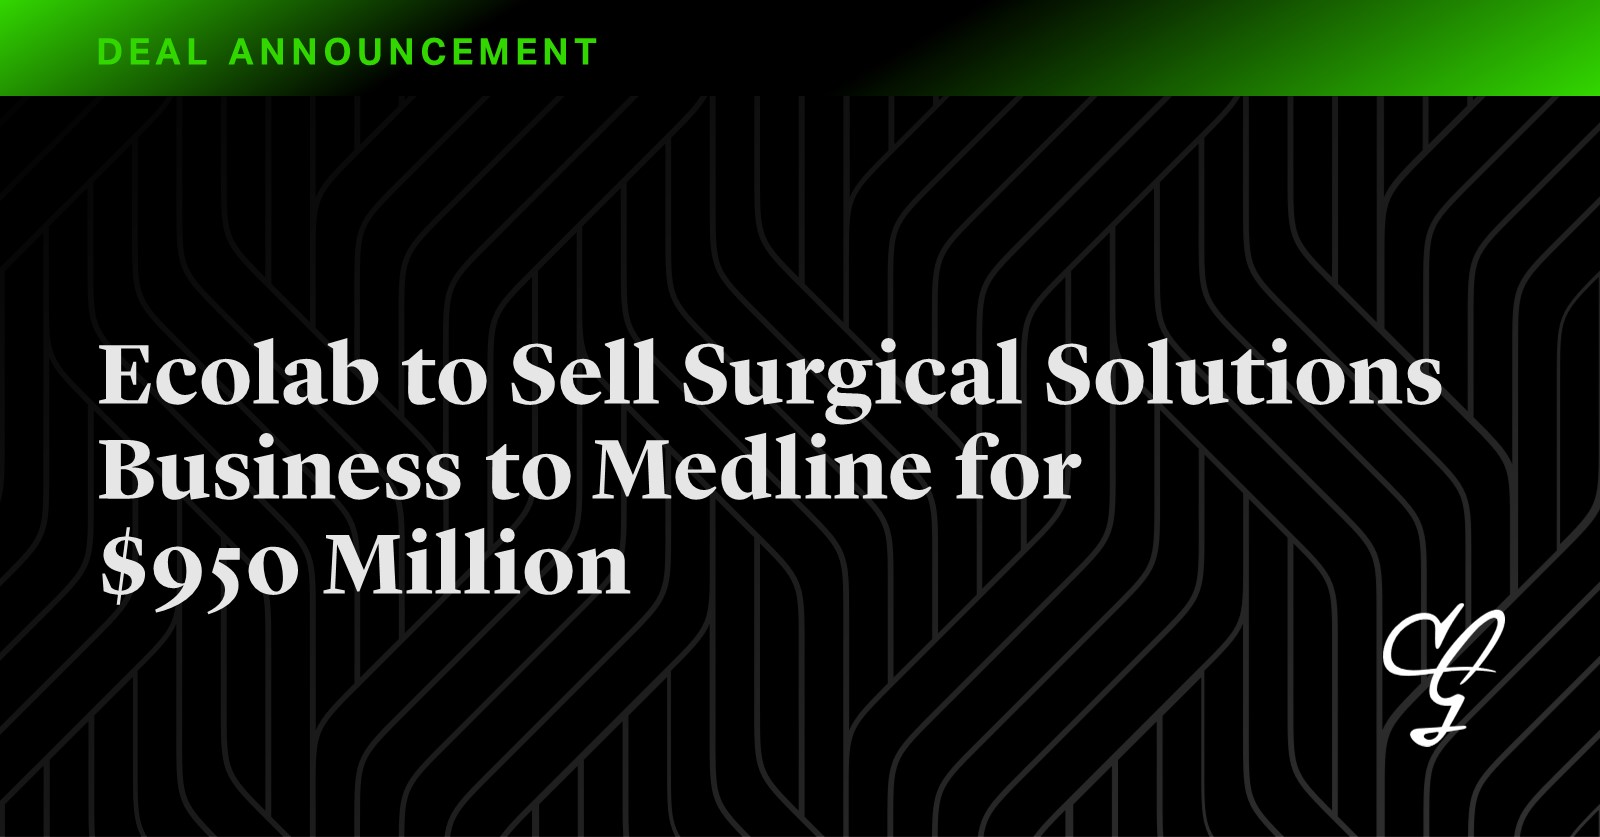 Ecolab Agrees to Sell Surgical Solutions Business to Medline for $950 Million